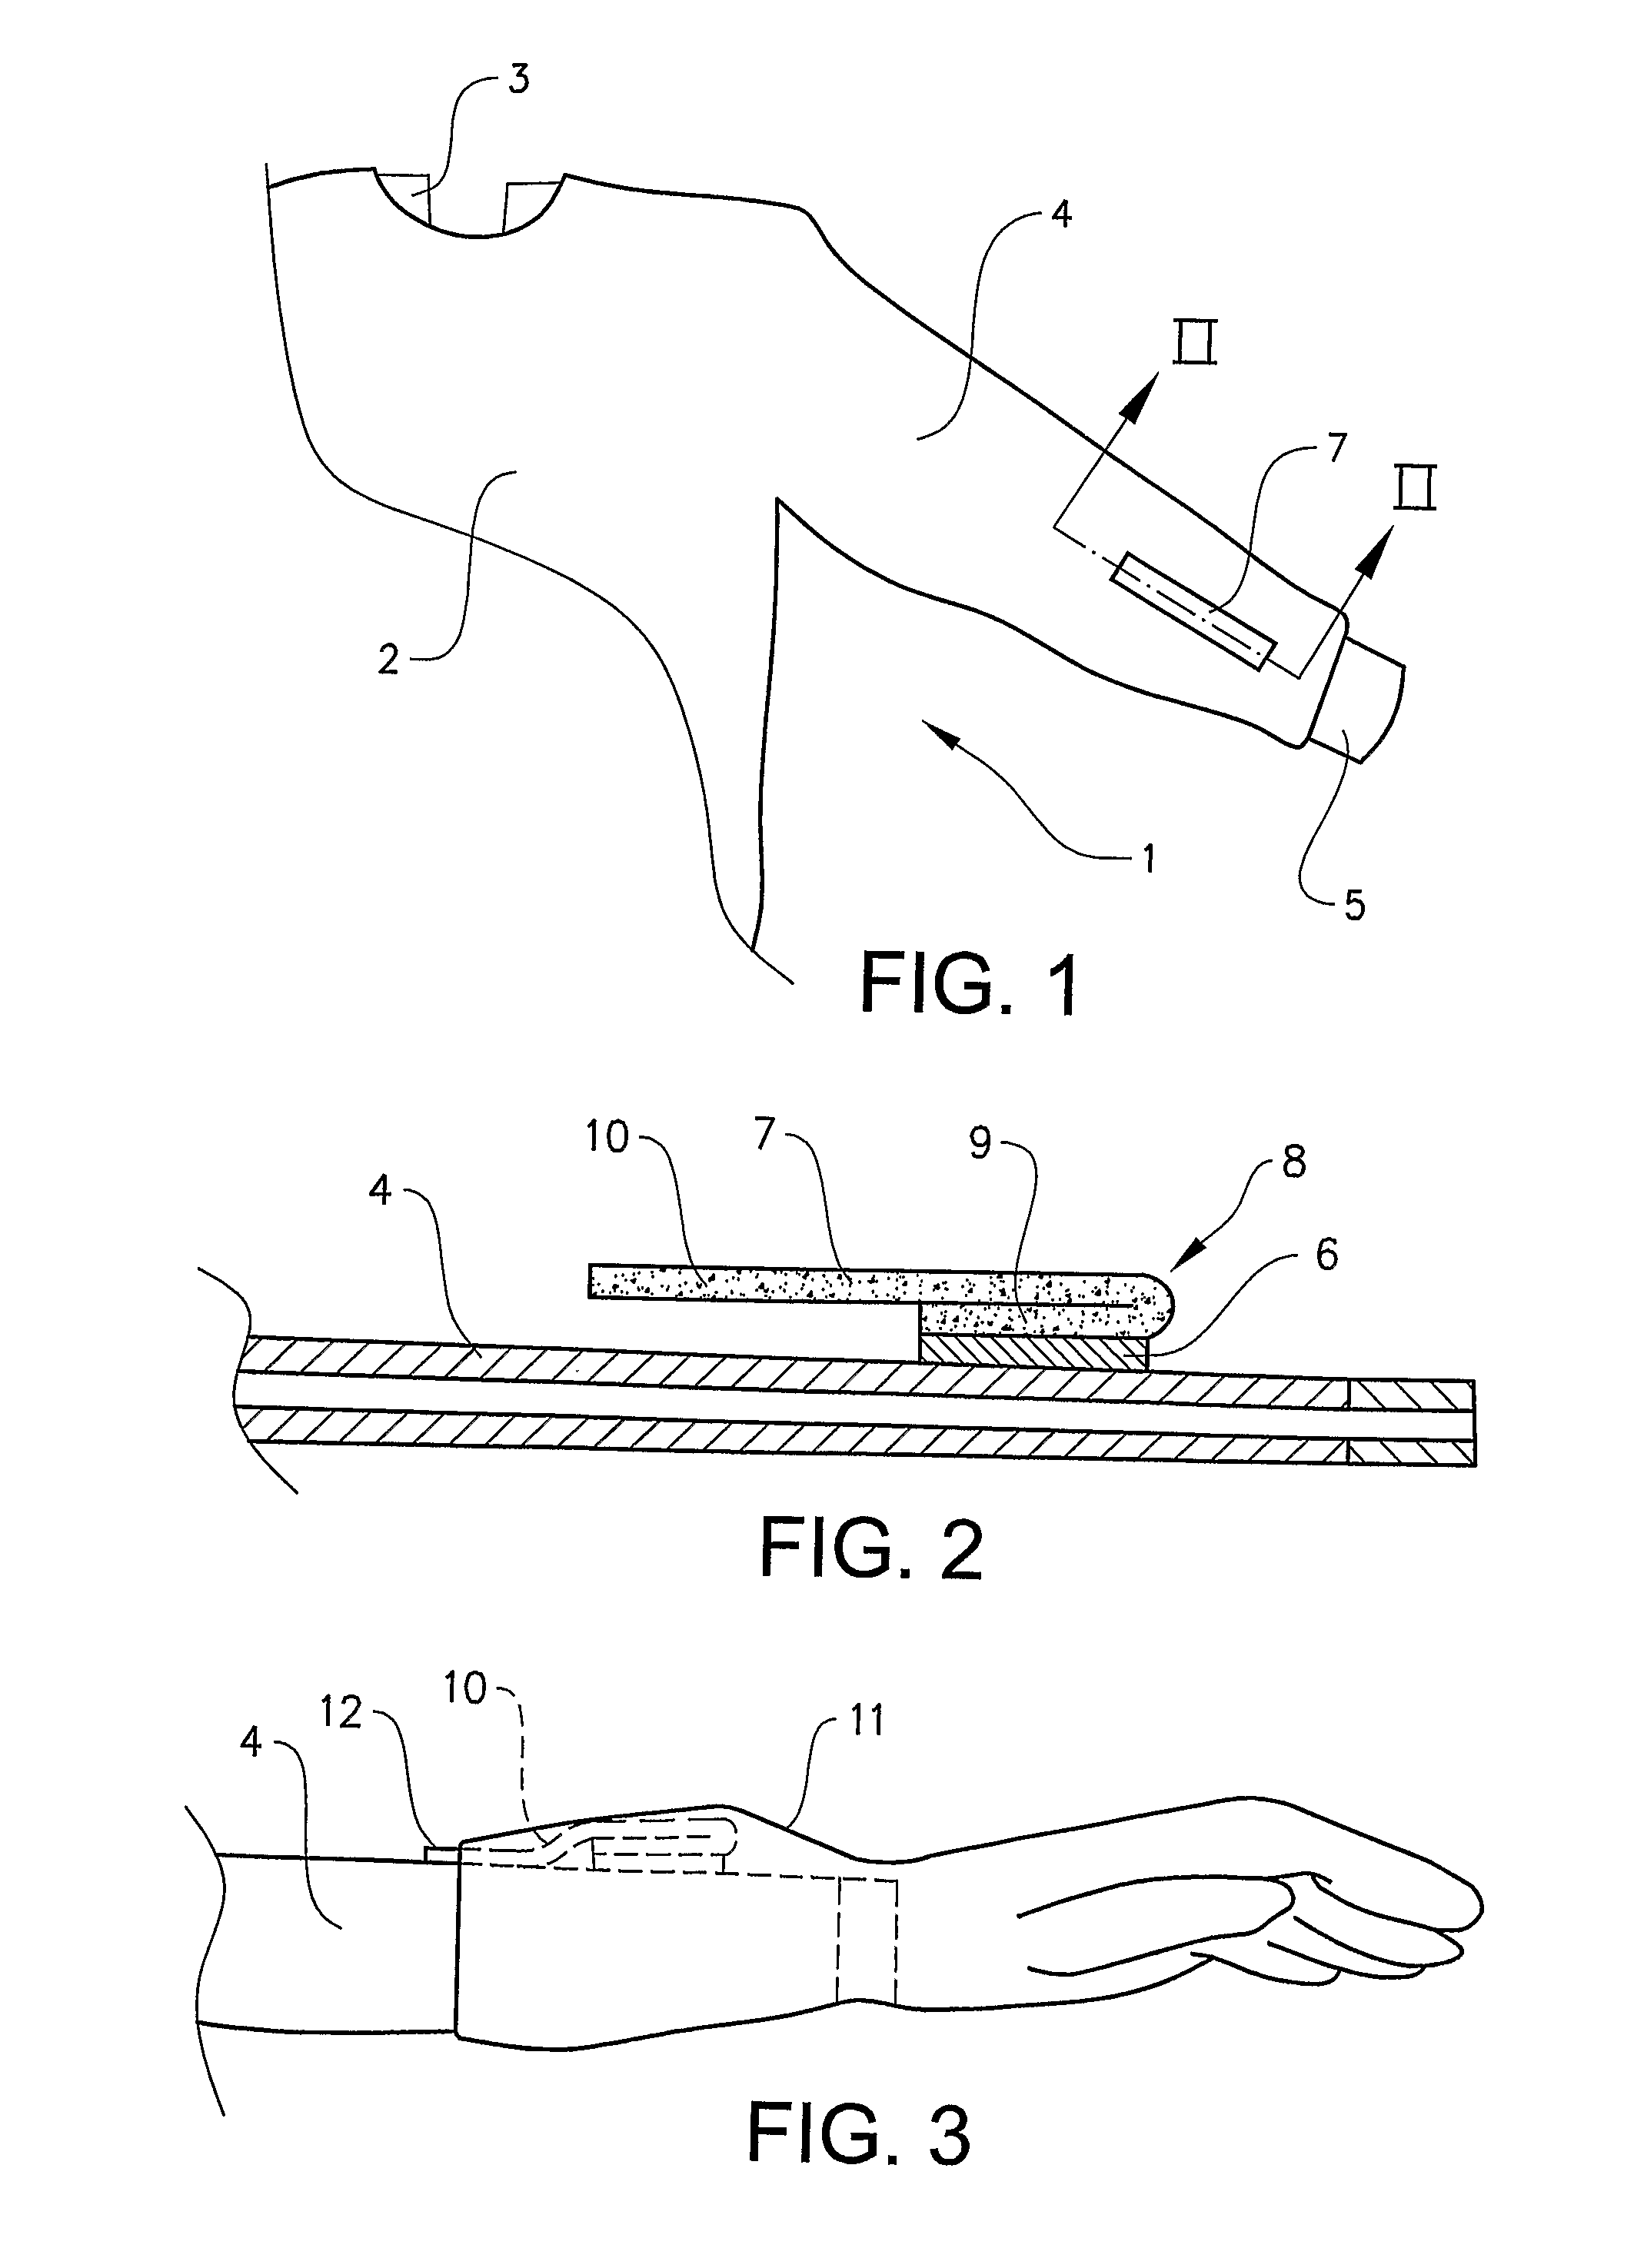 Surgical garment with means for affixing a glove thereto